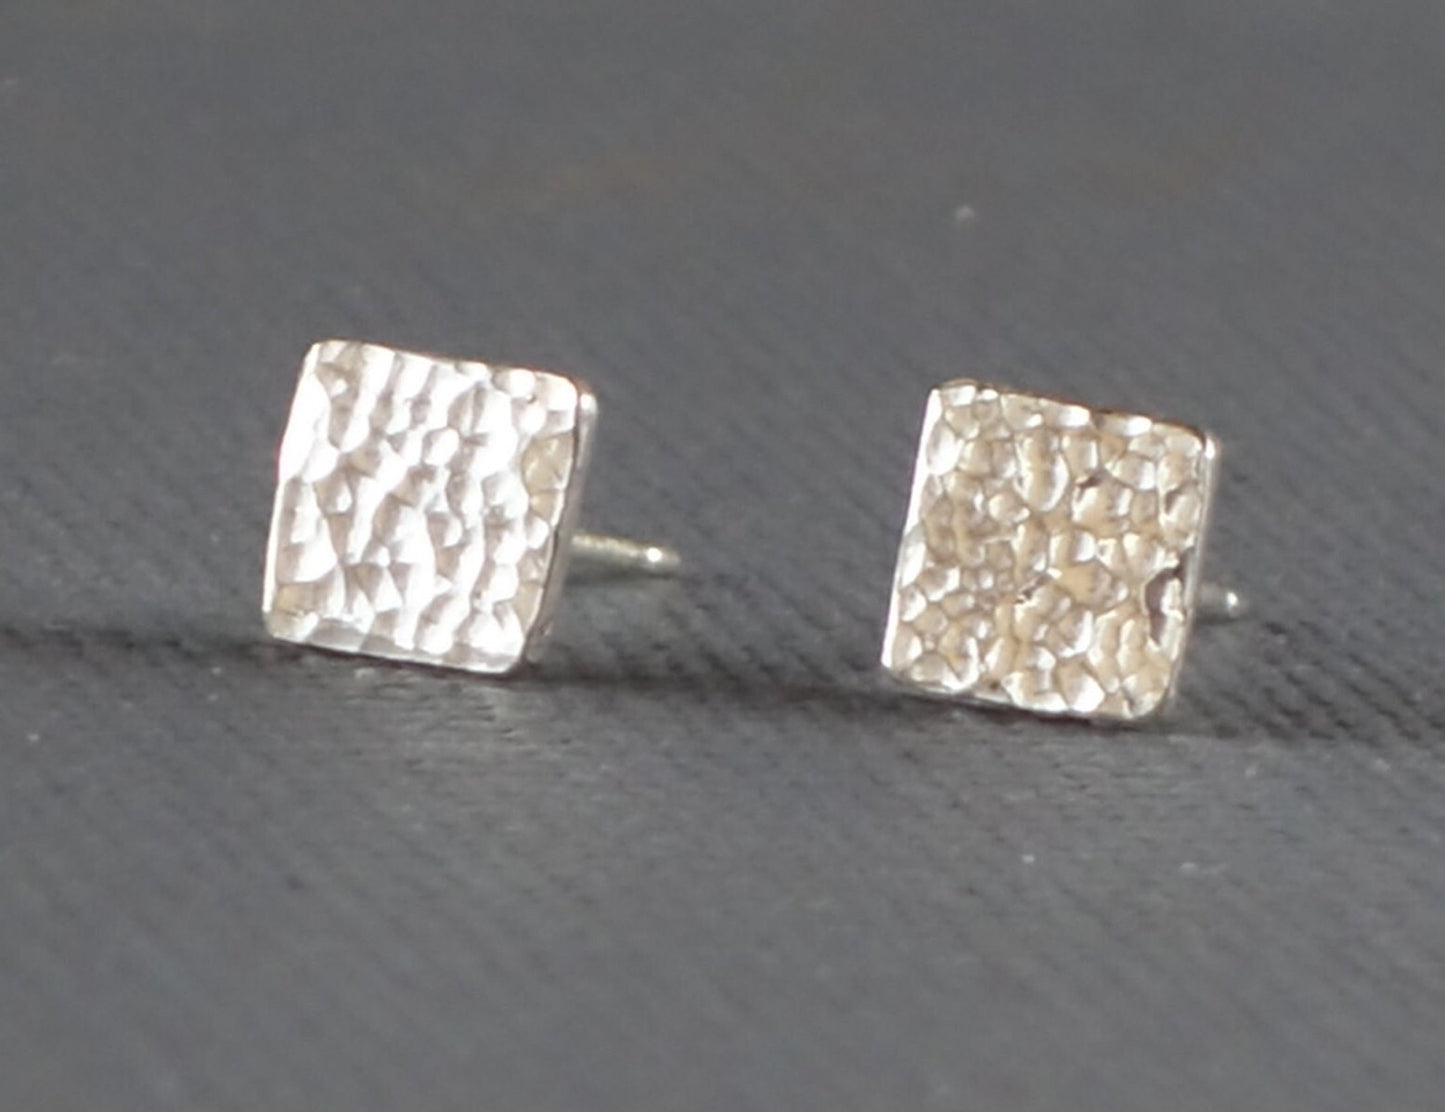 Silver Square Studs, Shiny Silver Square Post Earrings